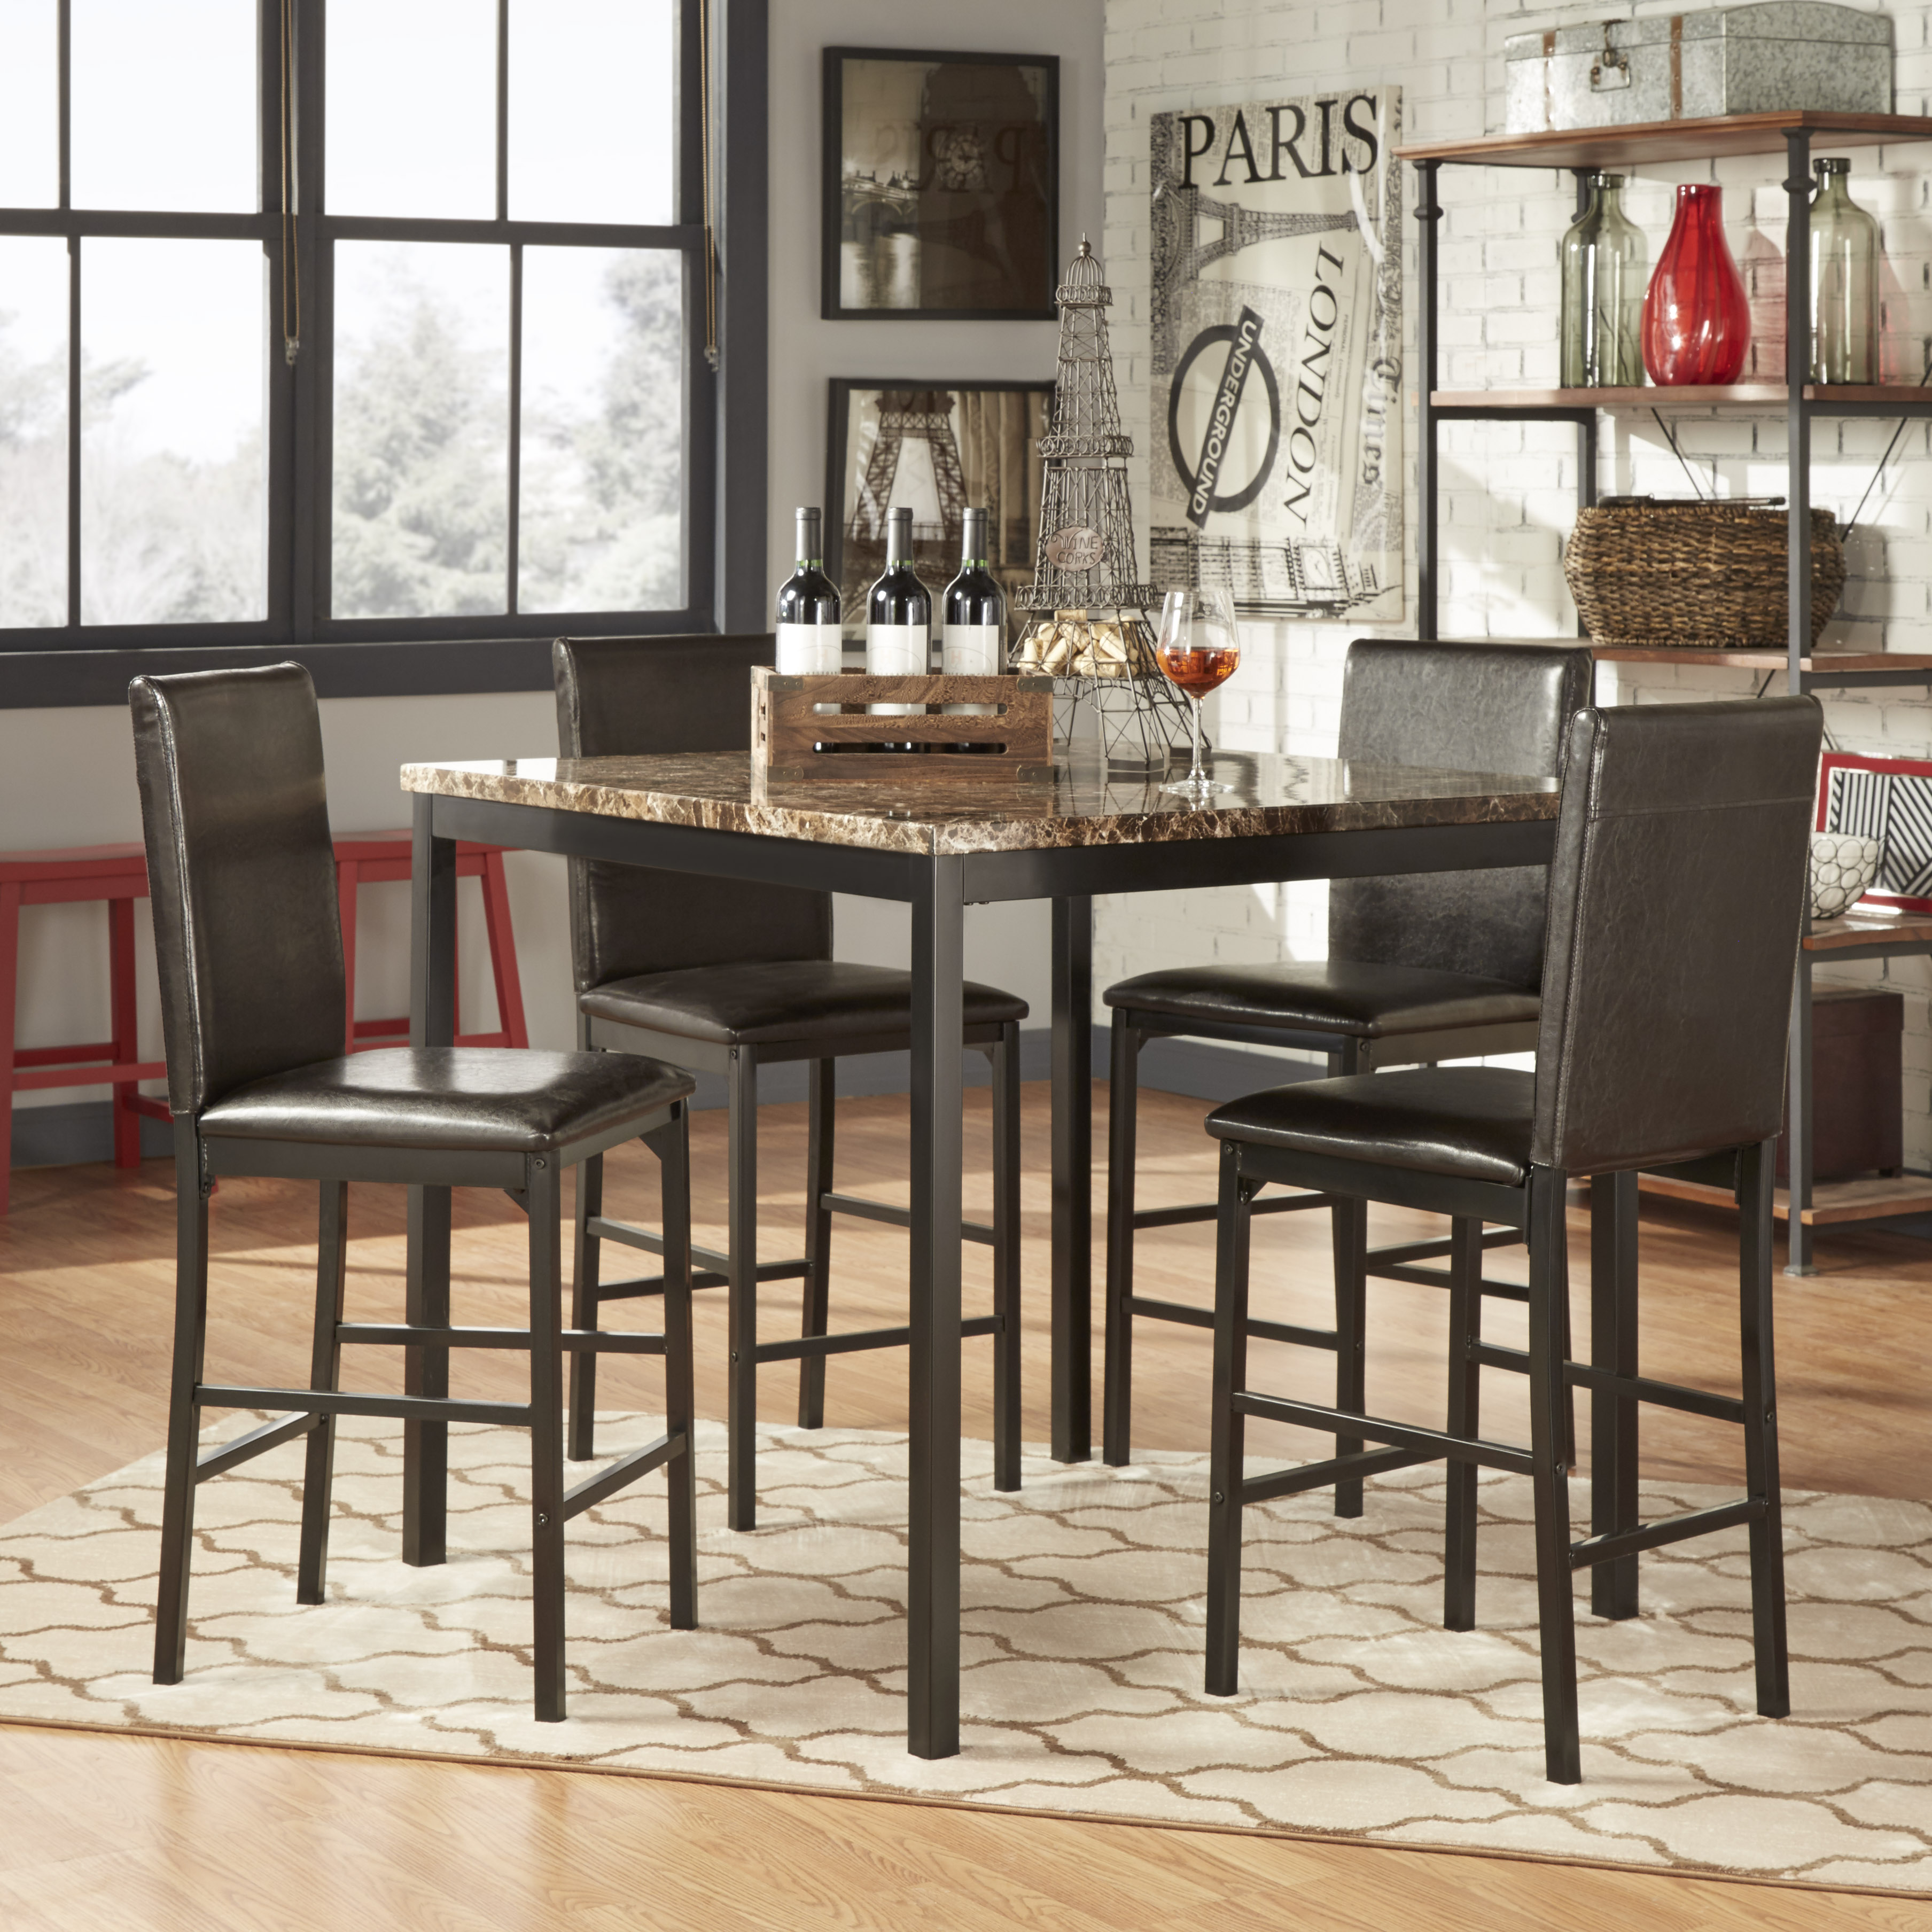 Metal Upholstered Counter Height Chairs (Set of 4)